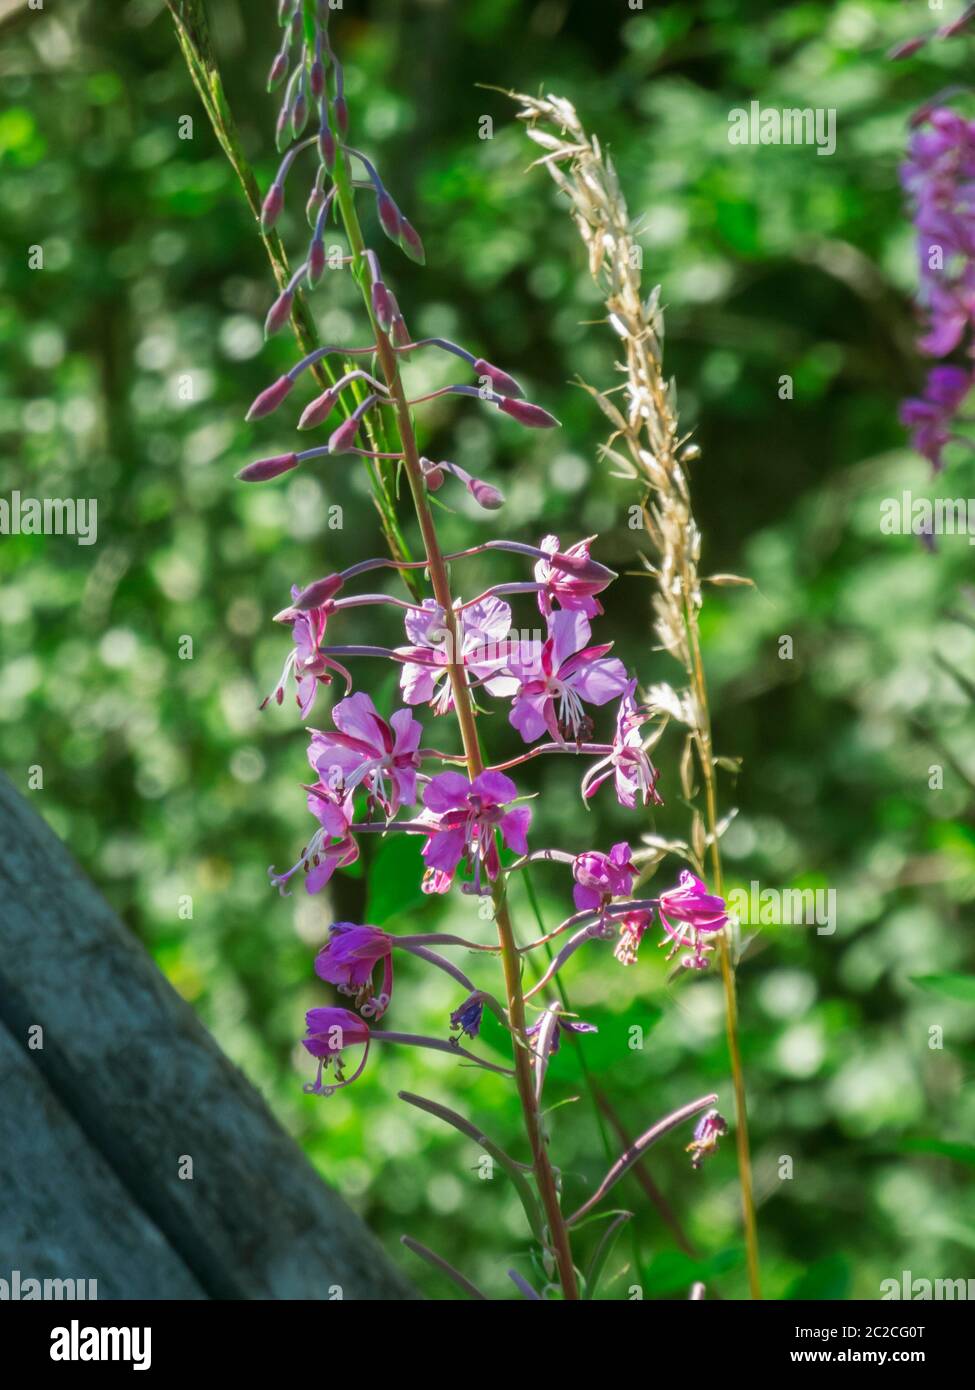 Close-up of a stem of the small-flowered willow tree (lat .: Epilobium parviflorum) in front of blurred natural green background. Stock Photo